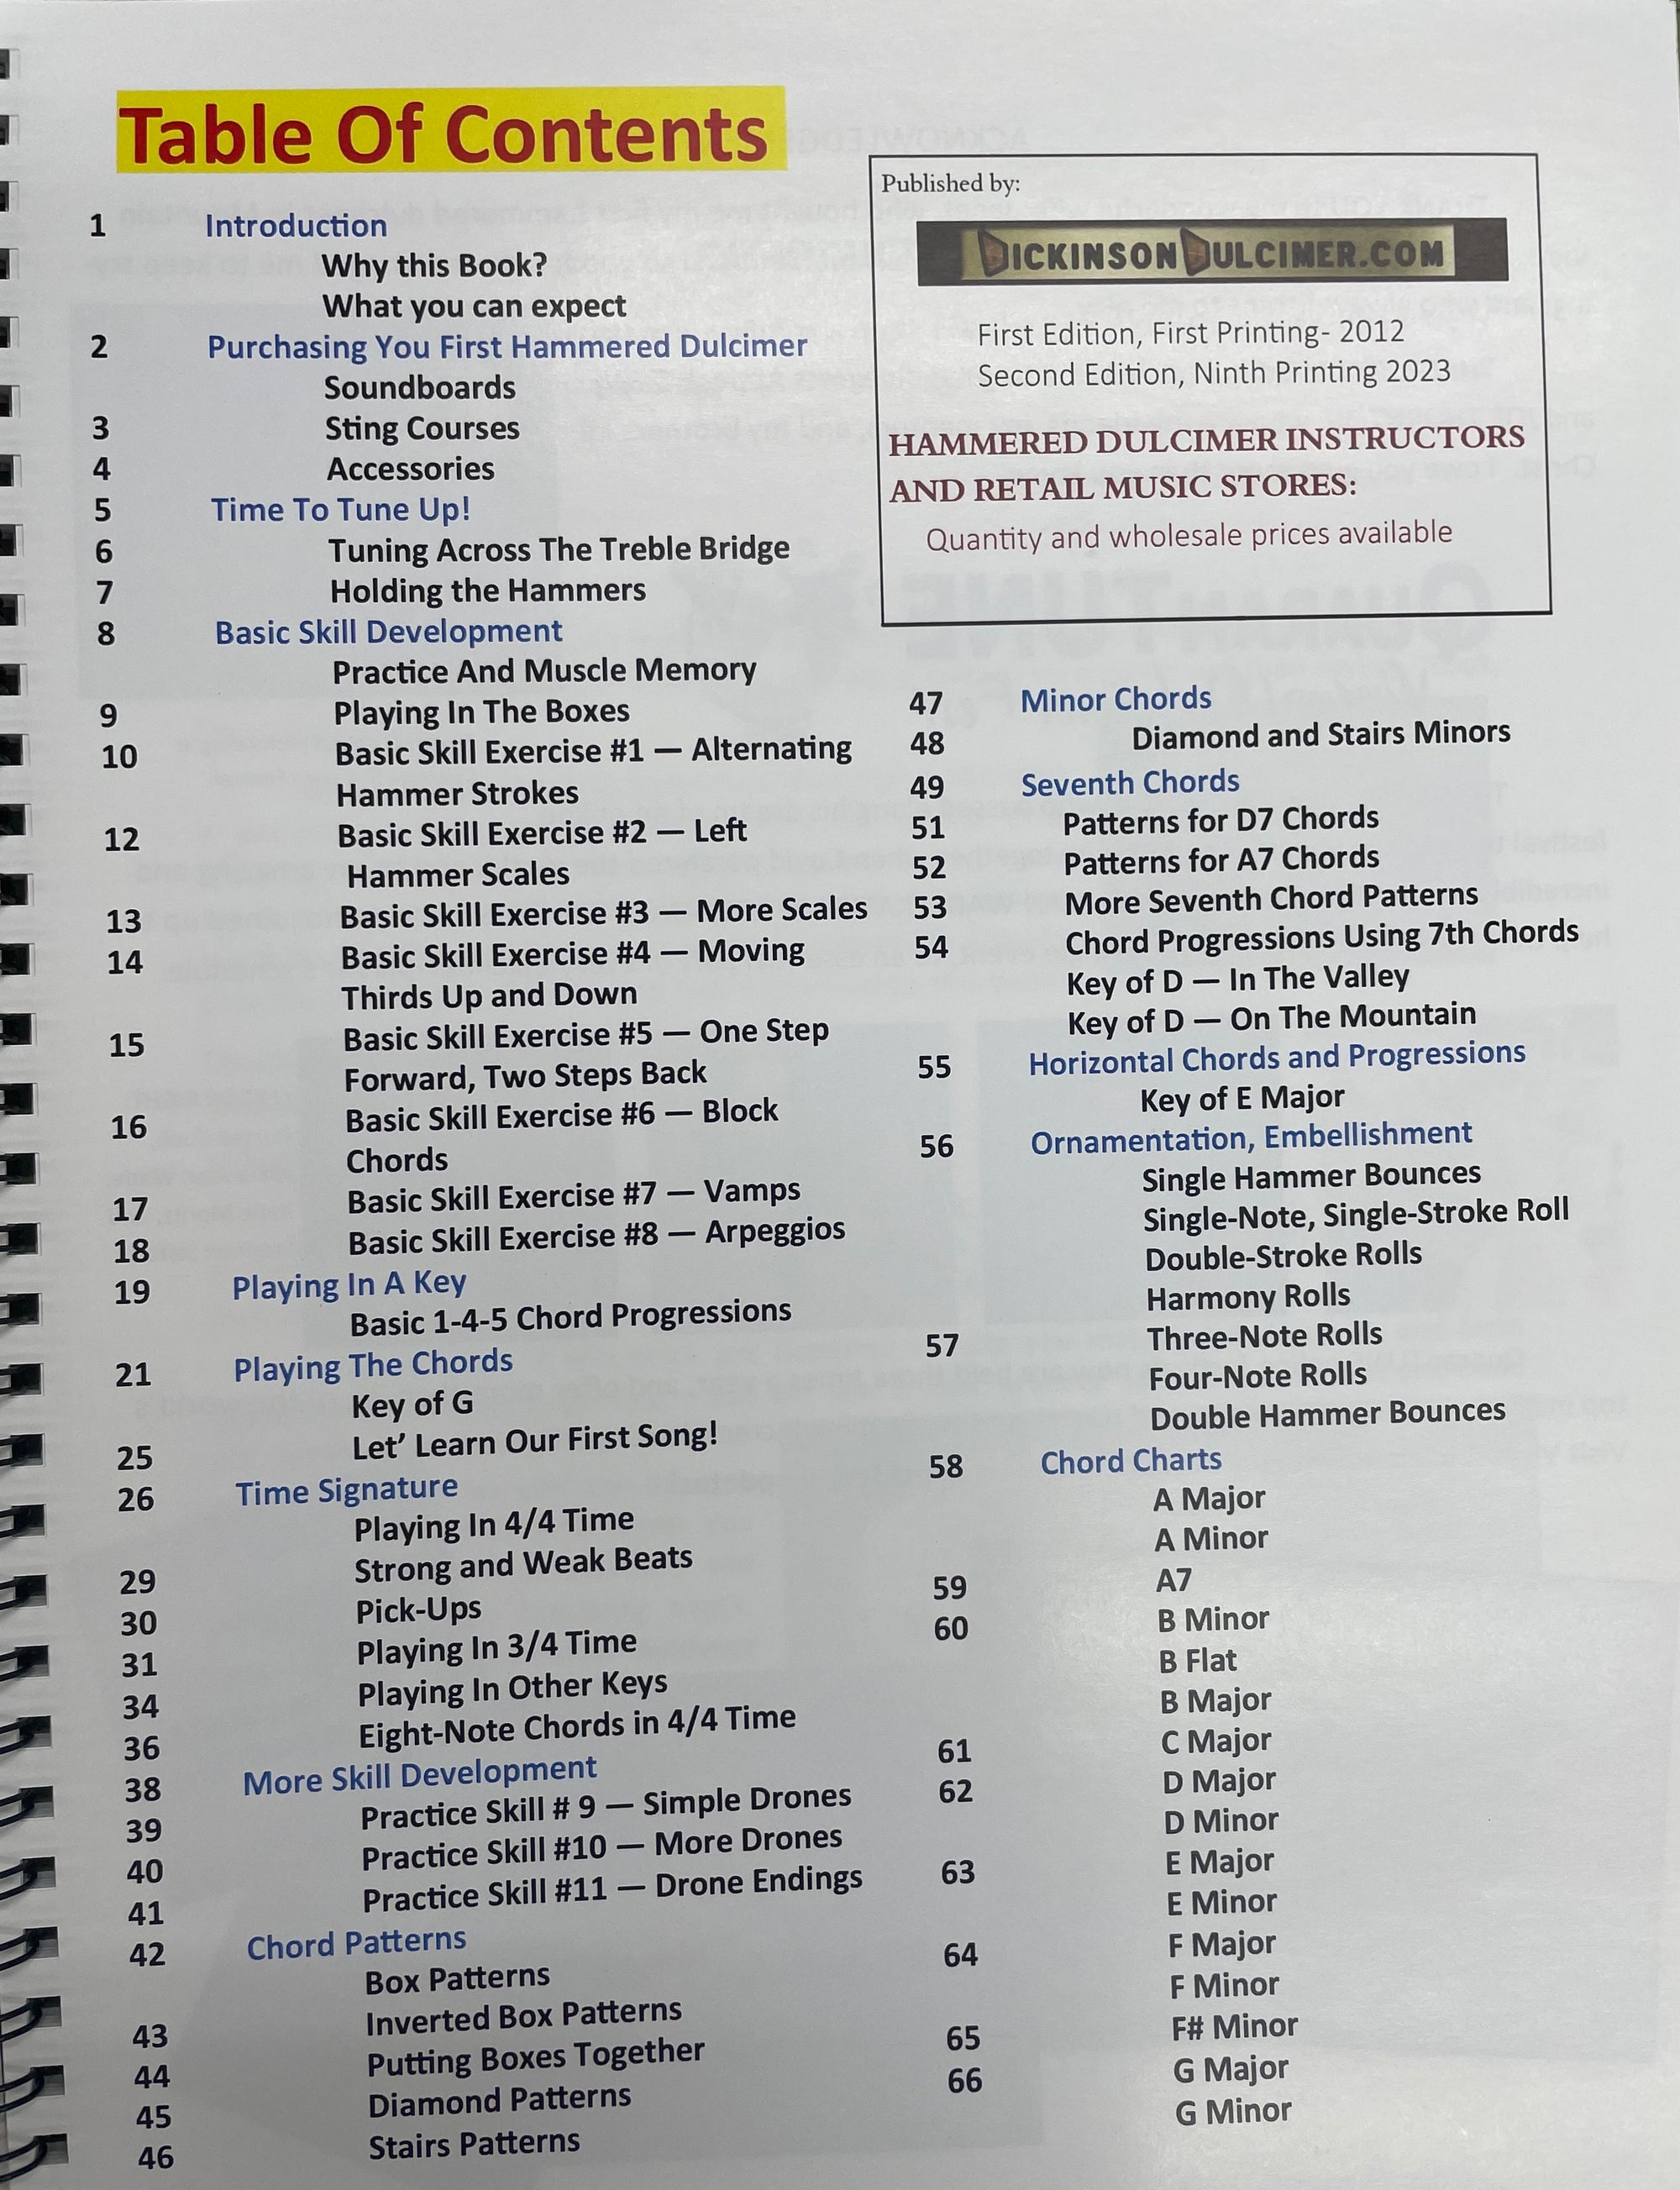 Table of contents for *The Essential Hammered Dulcimer Manual by Jess Dickinson*, covering topics such as introduction, purchasing, tuning your instrument, basic skills, exercises, and chords. Featuring sections with drills for playing arpeggios and song practice to perfect your chord structure.